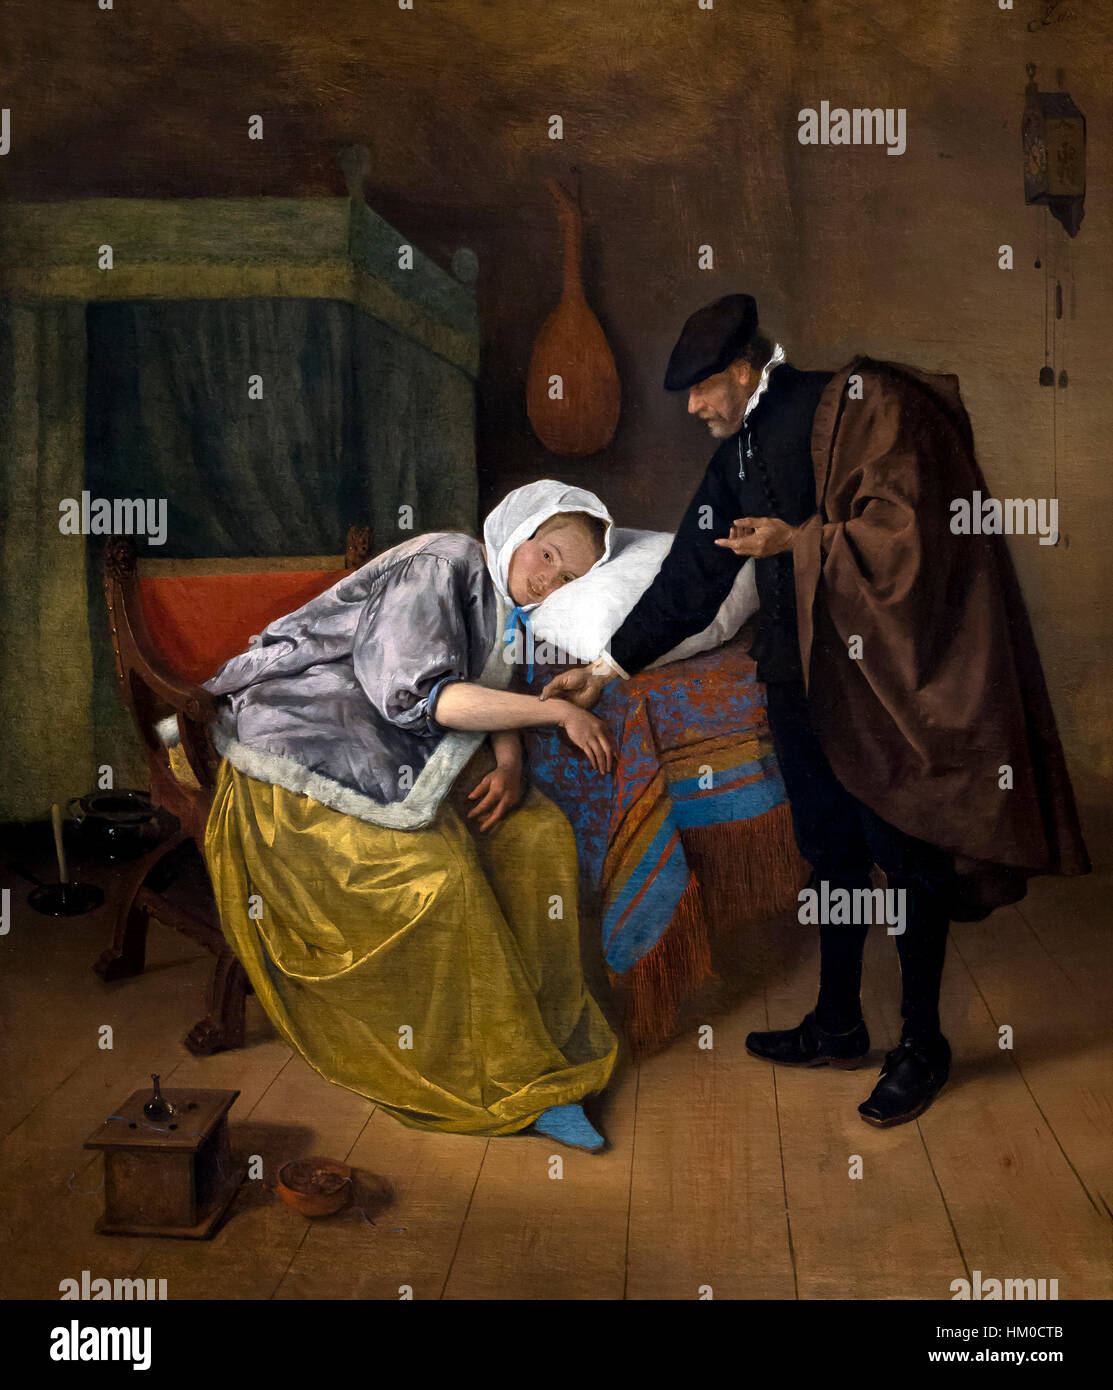 The Sick Woman, by Jan Steen, circa 1663-6, oil on canvas, Rijksmuseum, Amsterdam, Netherlands, Europe, Stock Photo